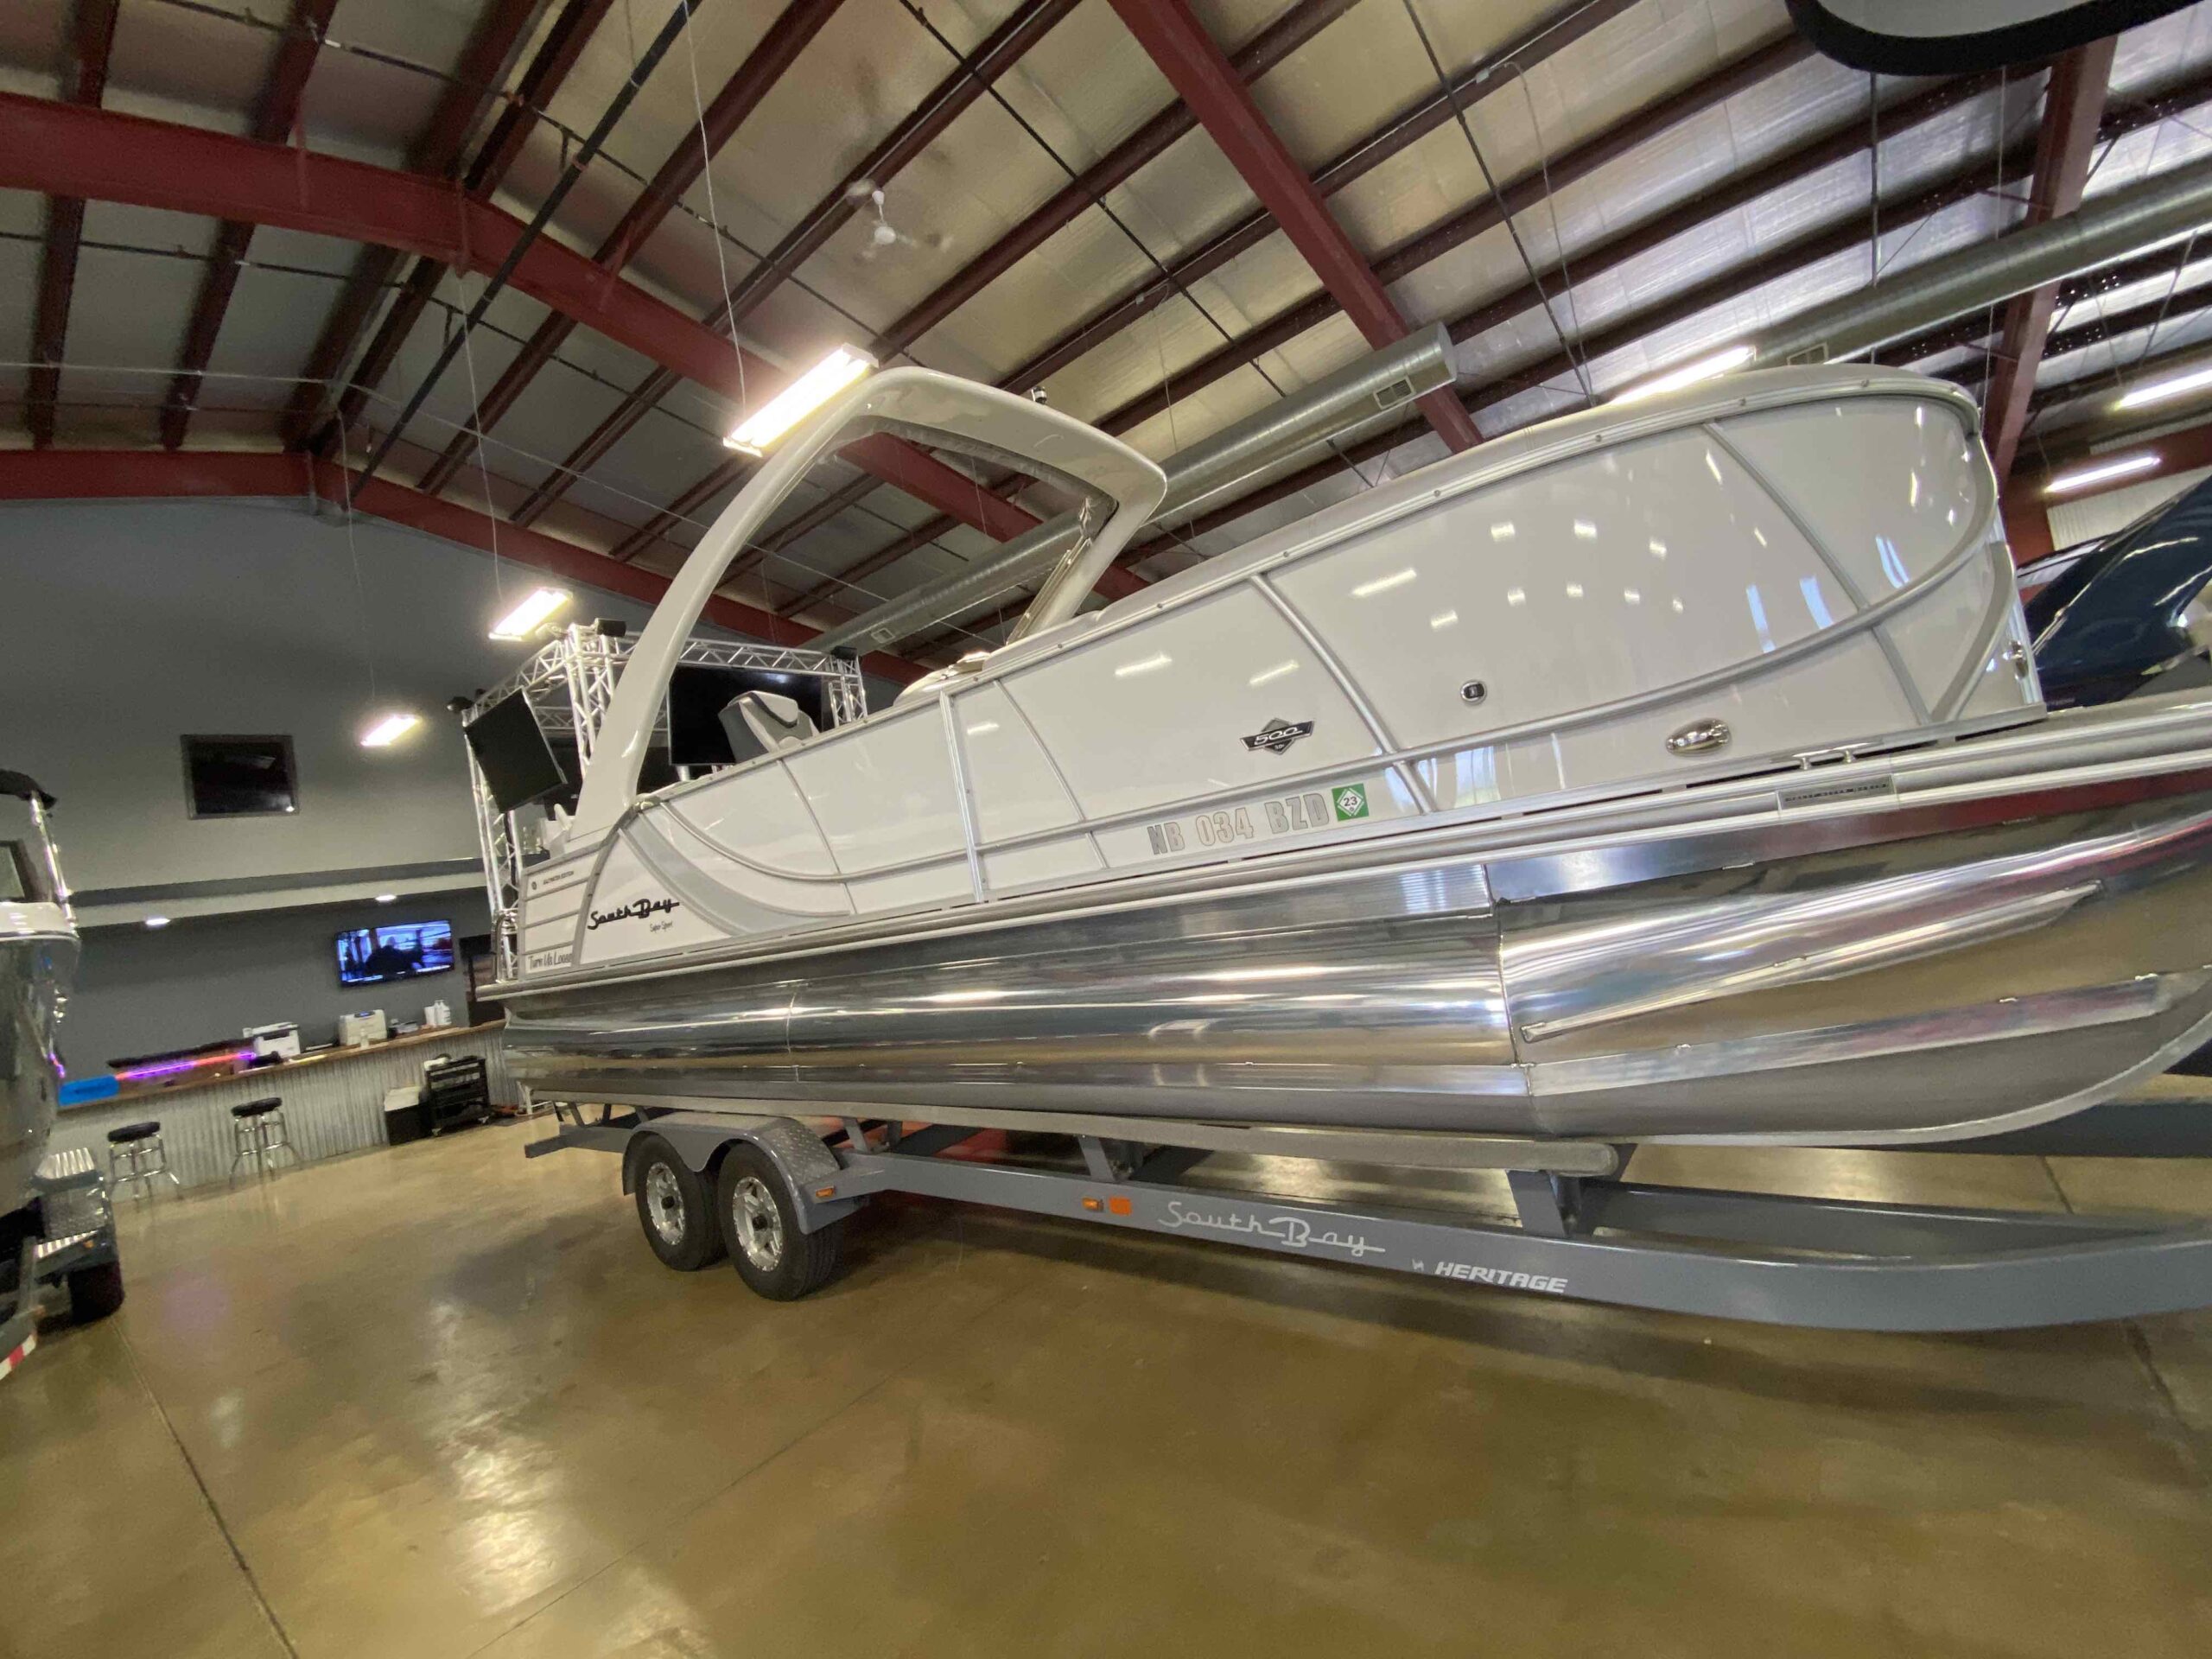 2018 South Bay Pontoon Boat for Sale at Valley Marine Showroom.